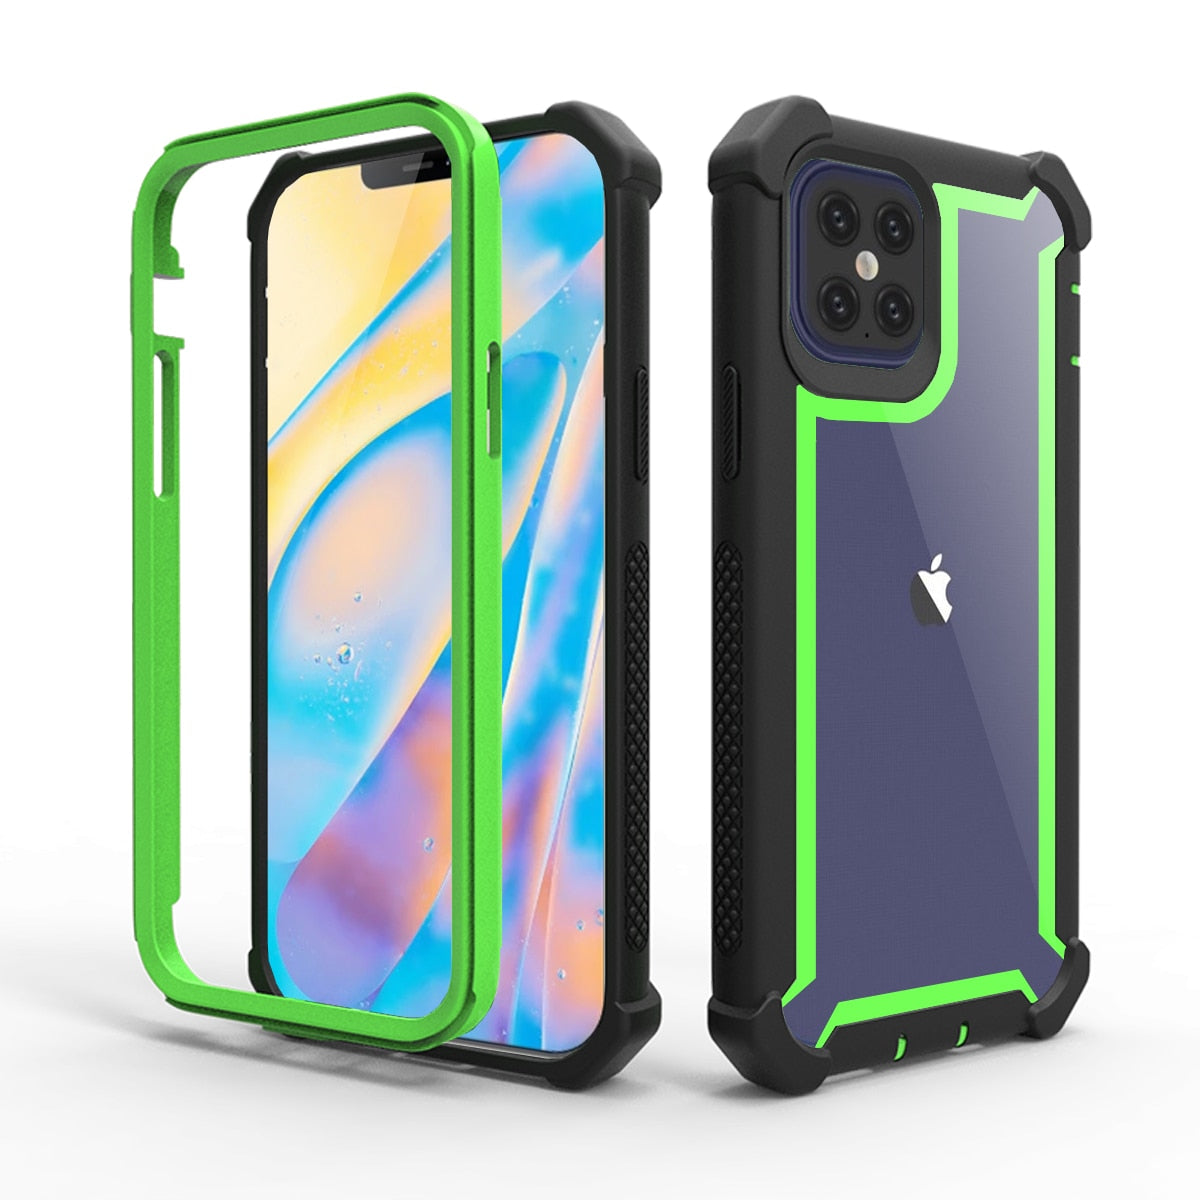 Case for iPhone 12 Pro Max Shockproof Cover Silicone Clear Back Cover Heavy Duty Protection Doom armor PC+Soft TPU Phone Case - 380230 Find Epic Store